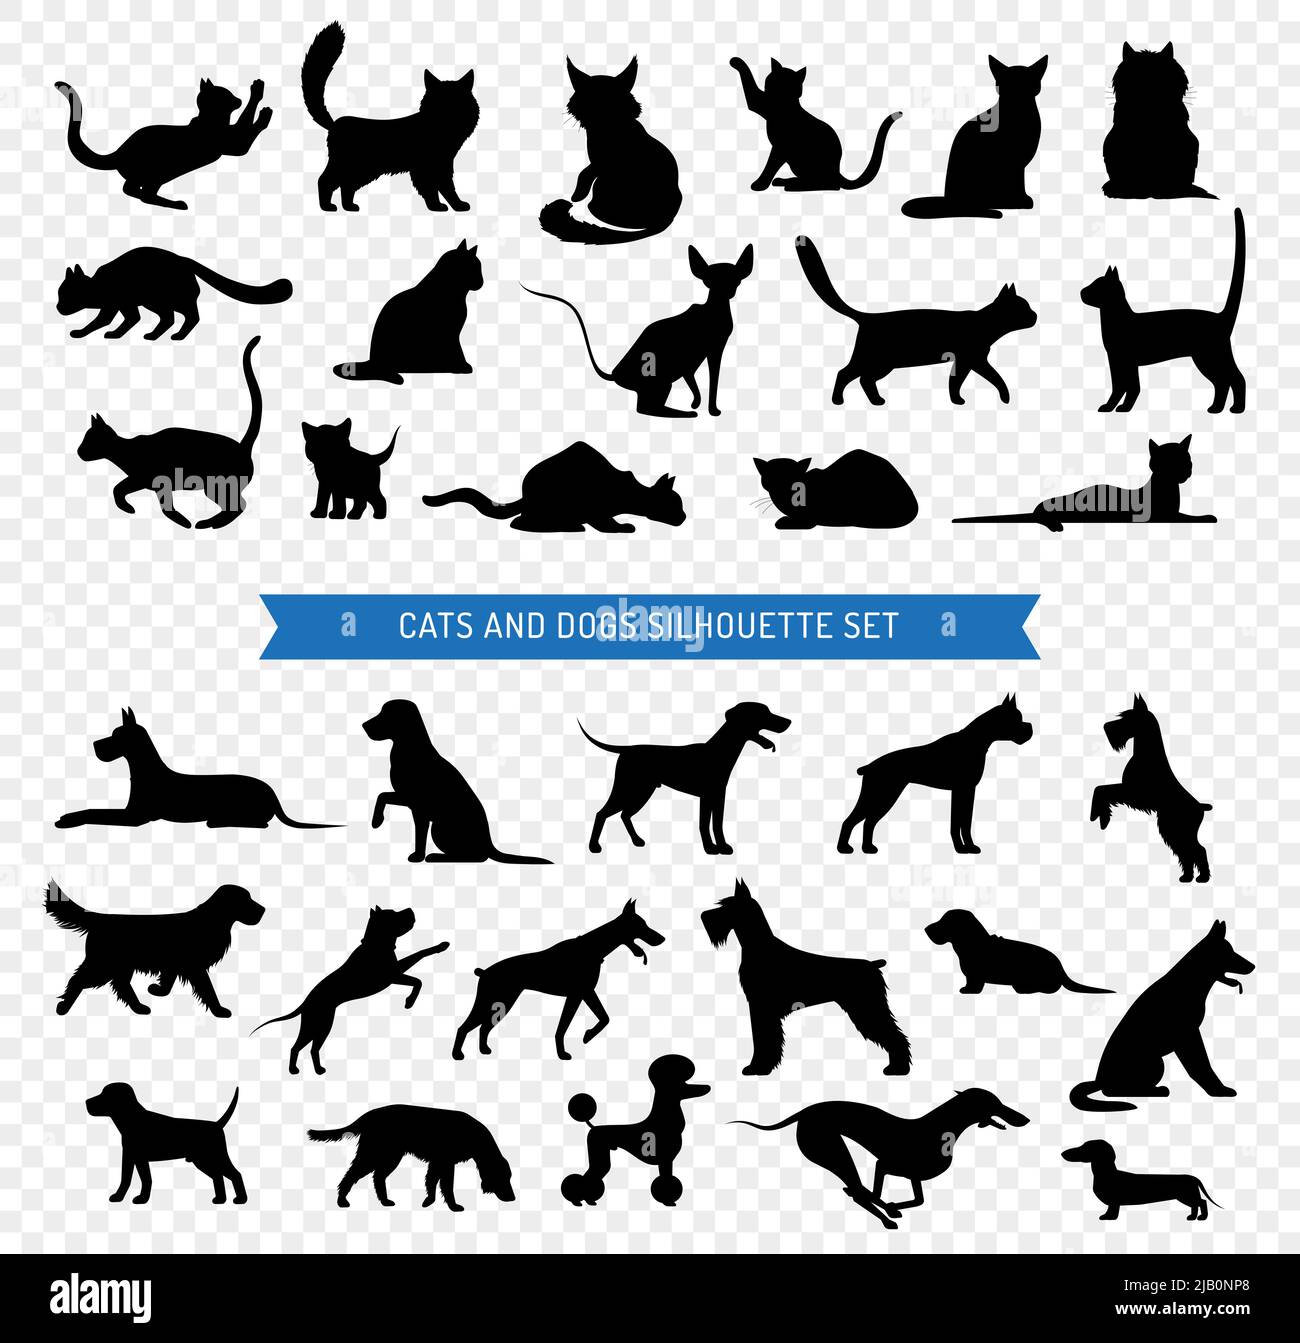 Black silhouette set of different breeds of dogs and cats on transparent background isolated vector illustration Stock Vector